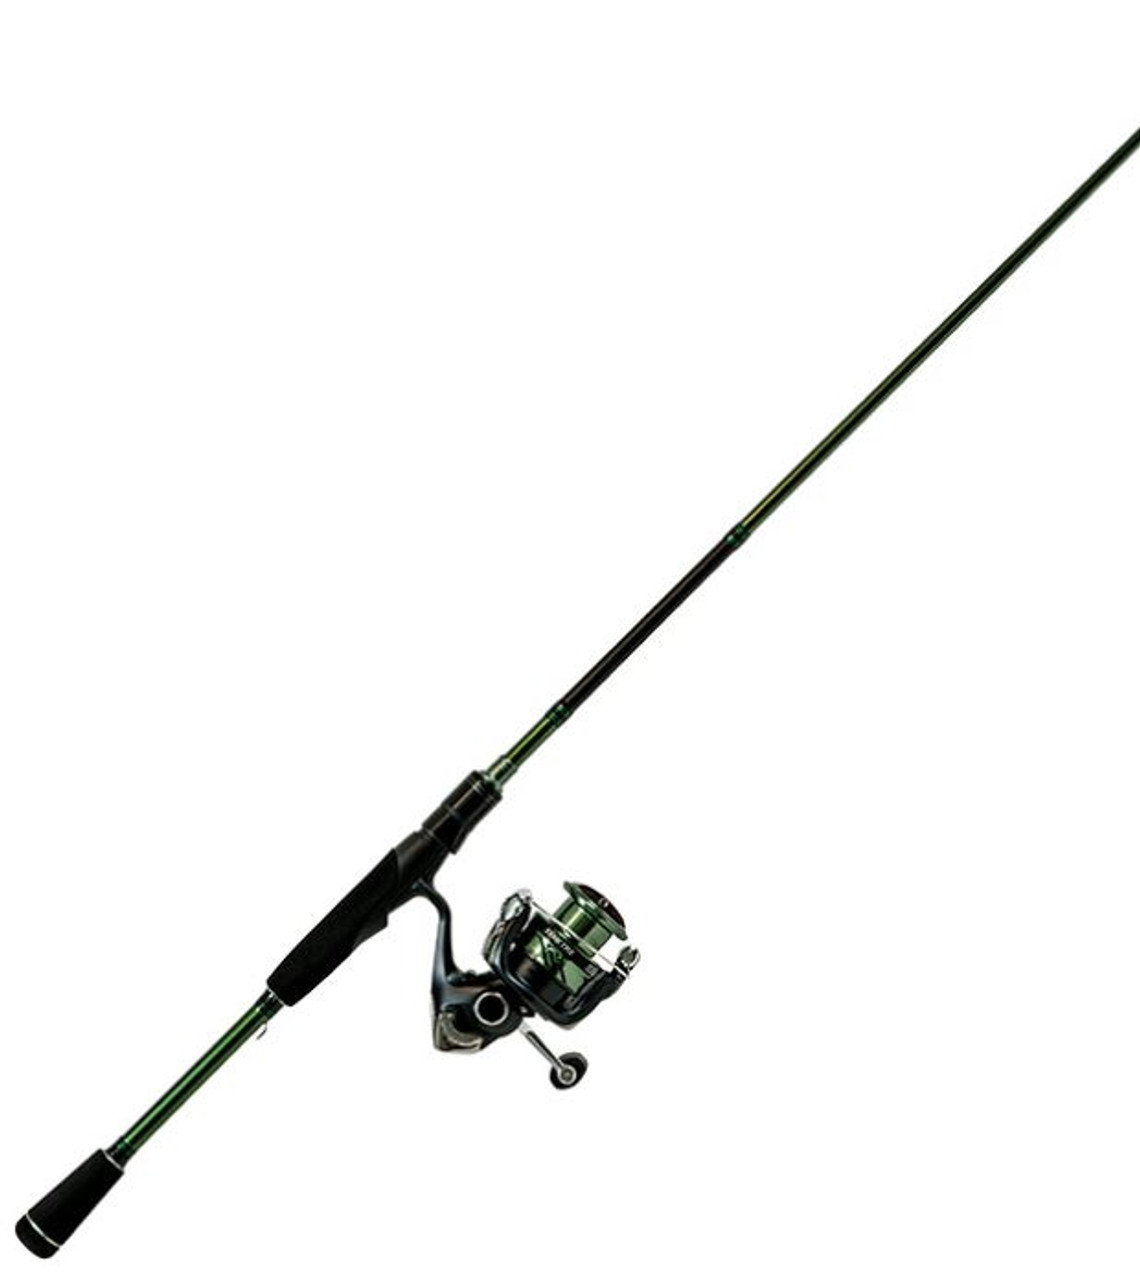 Symetre 1000 Spinning Combo (psy1000fmsys60l2) - Charcoal/Green/Black -  Ramsey Outdoor